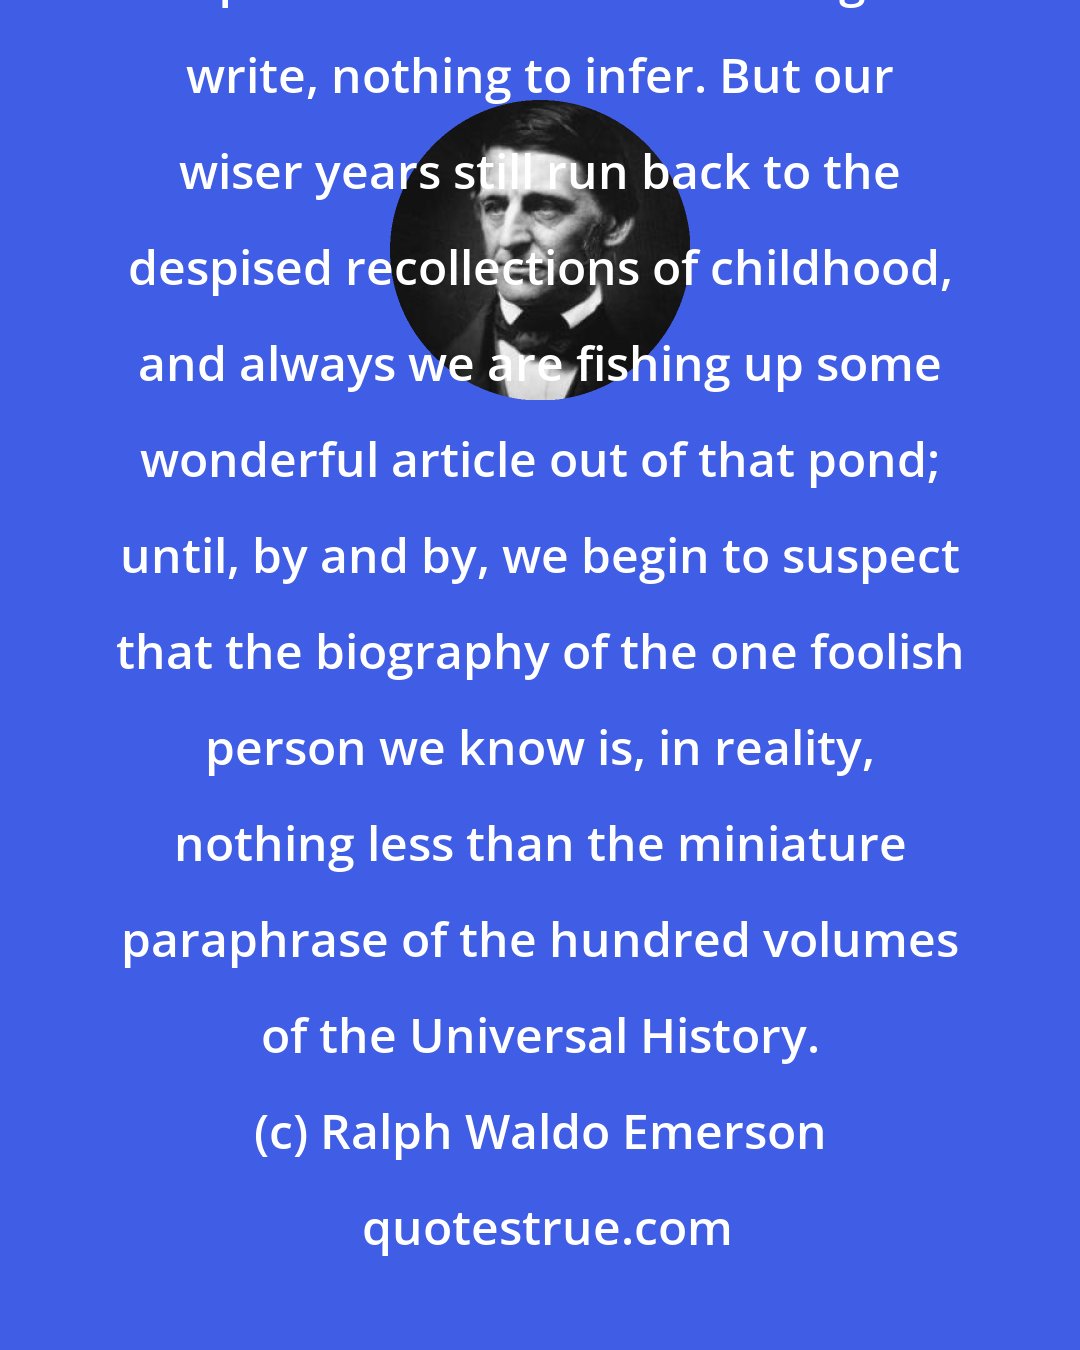 Ralph Waldo Emerson: It is long ere we discover how rich we are. Our history, we are sure, is quite tame: we have nothing to write, nothing to infer. But our wiser years still run back to the despised recollections of childhood, and always we are fishing up some wonderful article out of that pond; until, by and by, we begin to suspect that the biography of the one foolish person we know is, in reality, nothing less than the miniature paraphrase of the hundred volumes of the Universal History.